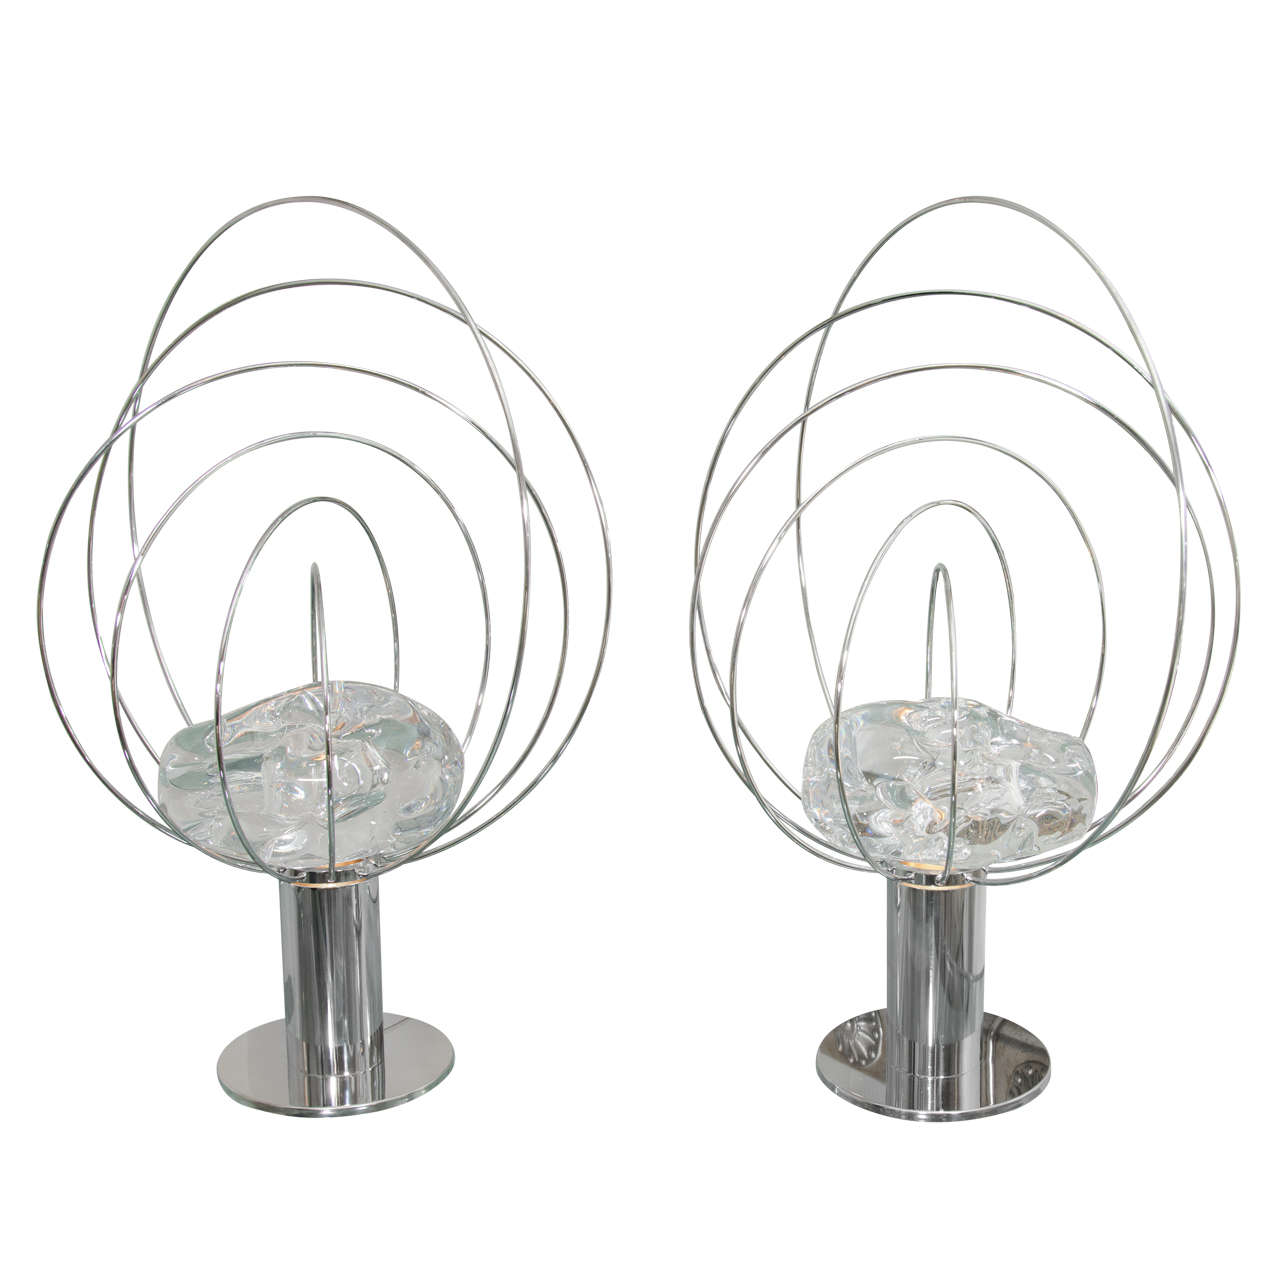 Pair of Chrome Orbital Form Lamps with Rock Crystal Center